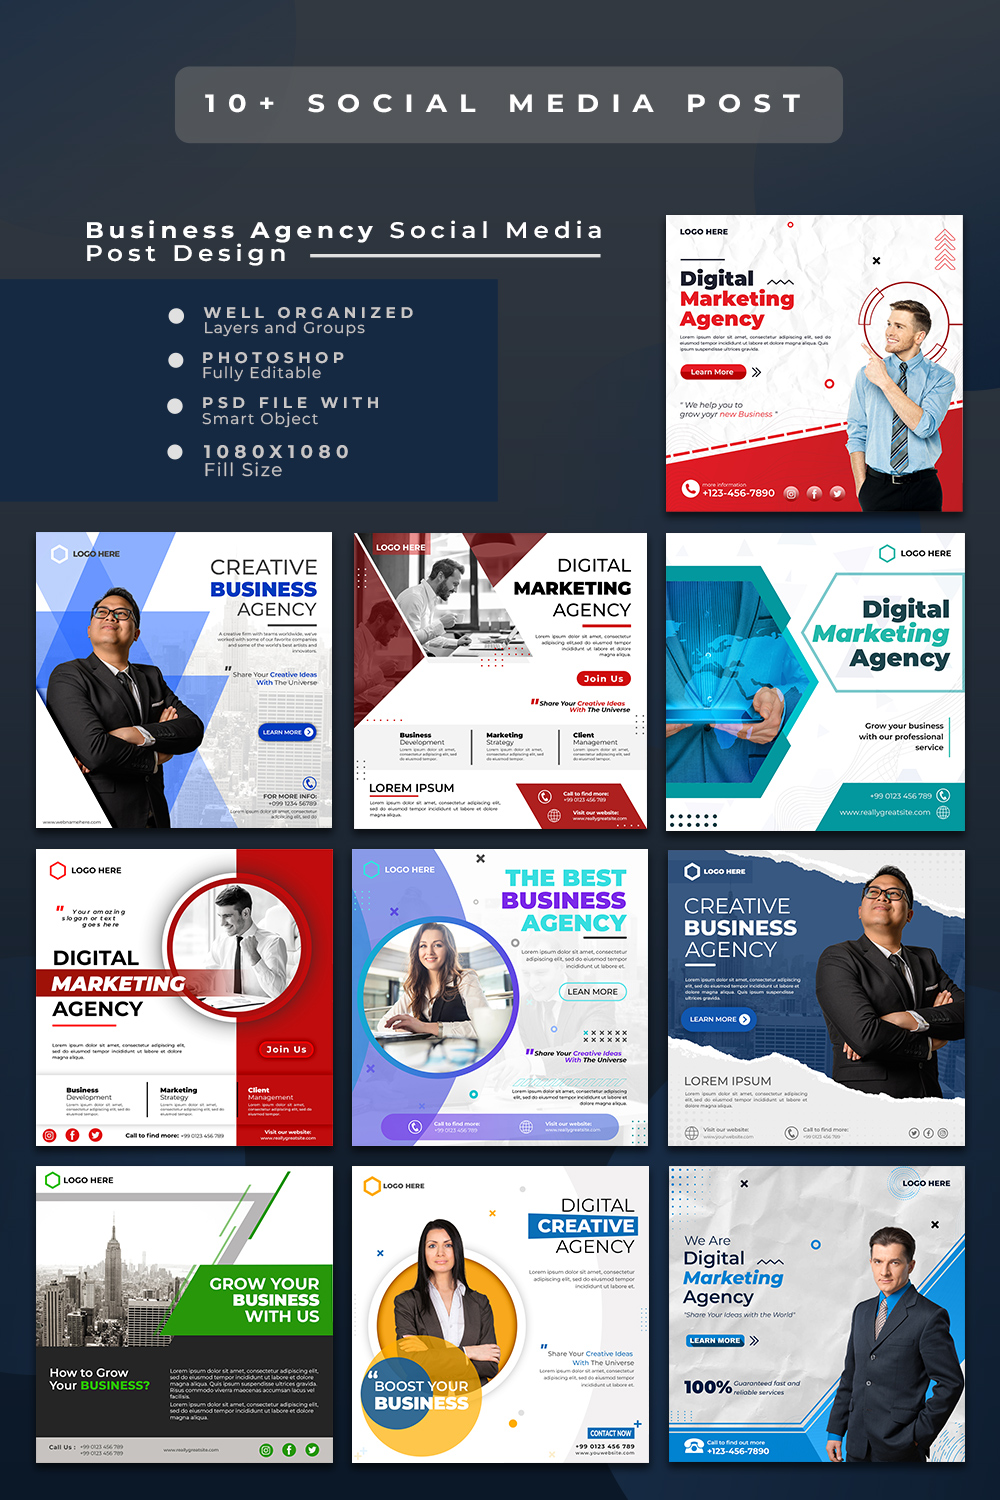 10+ Corporate and Digital Marketing Agency Social Media Posts And Web Banner PSD Template pinterest preview image.